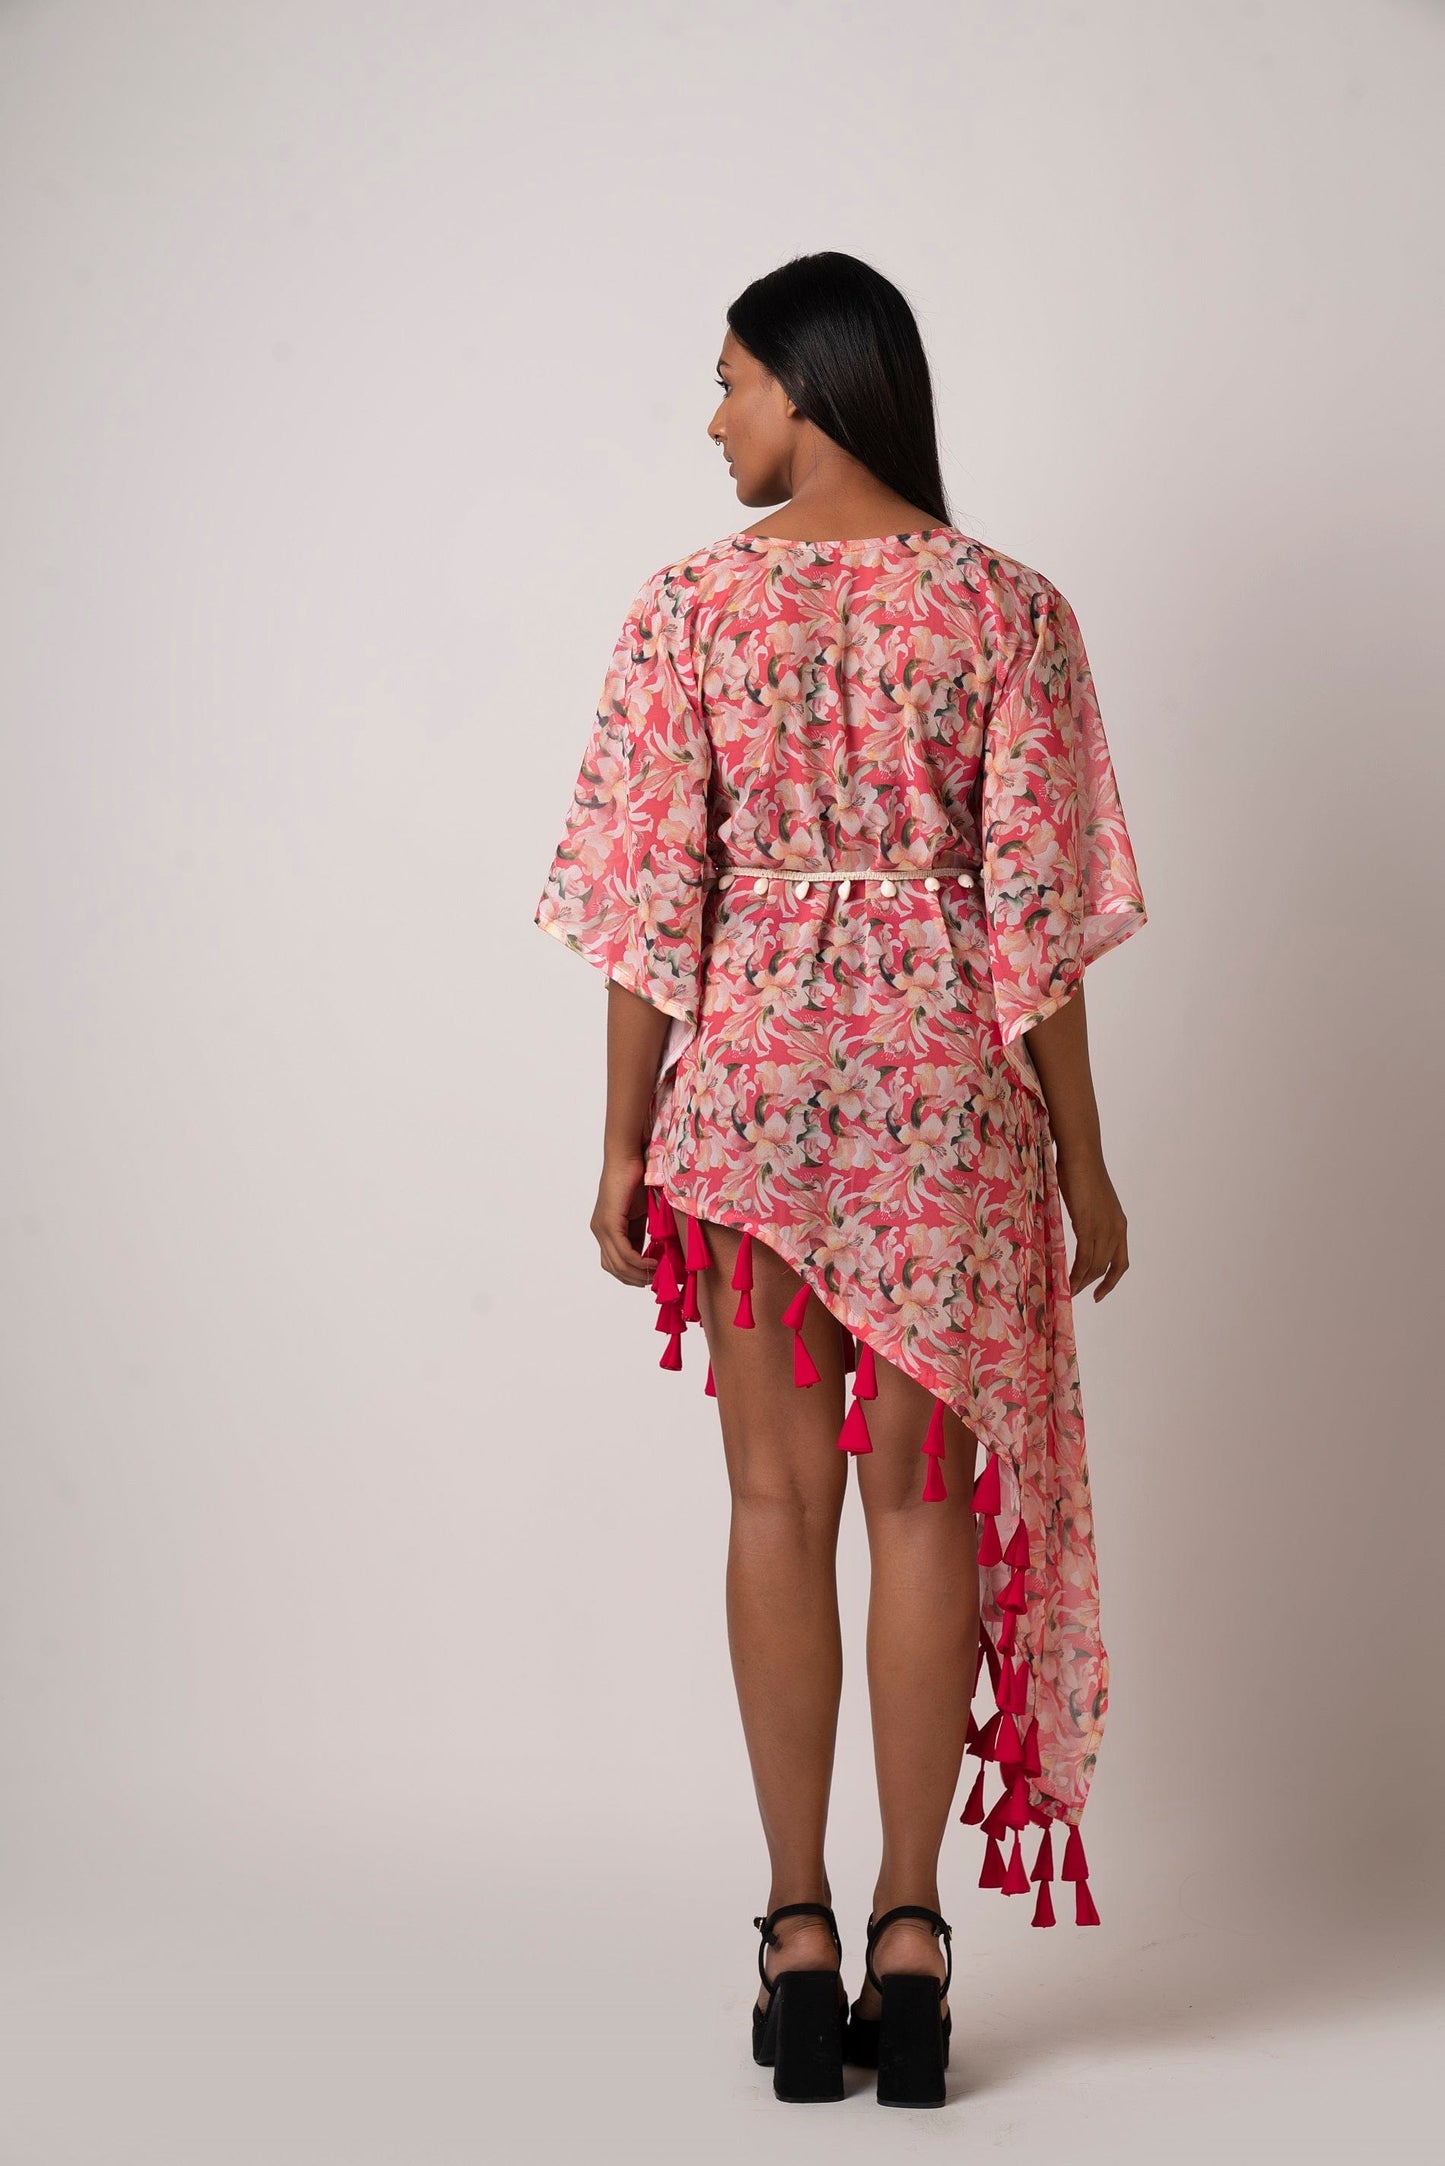 This red floral beach dress is perfect as summer beach wear for women.  Its lightweight fabric, flowy silhouette, and kimono-style sleeves make it comfortable to wear all day. The sea shell belt cinches at the waist, giving you a perfectly flattering look. 